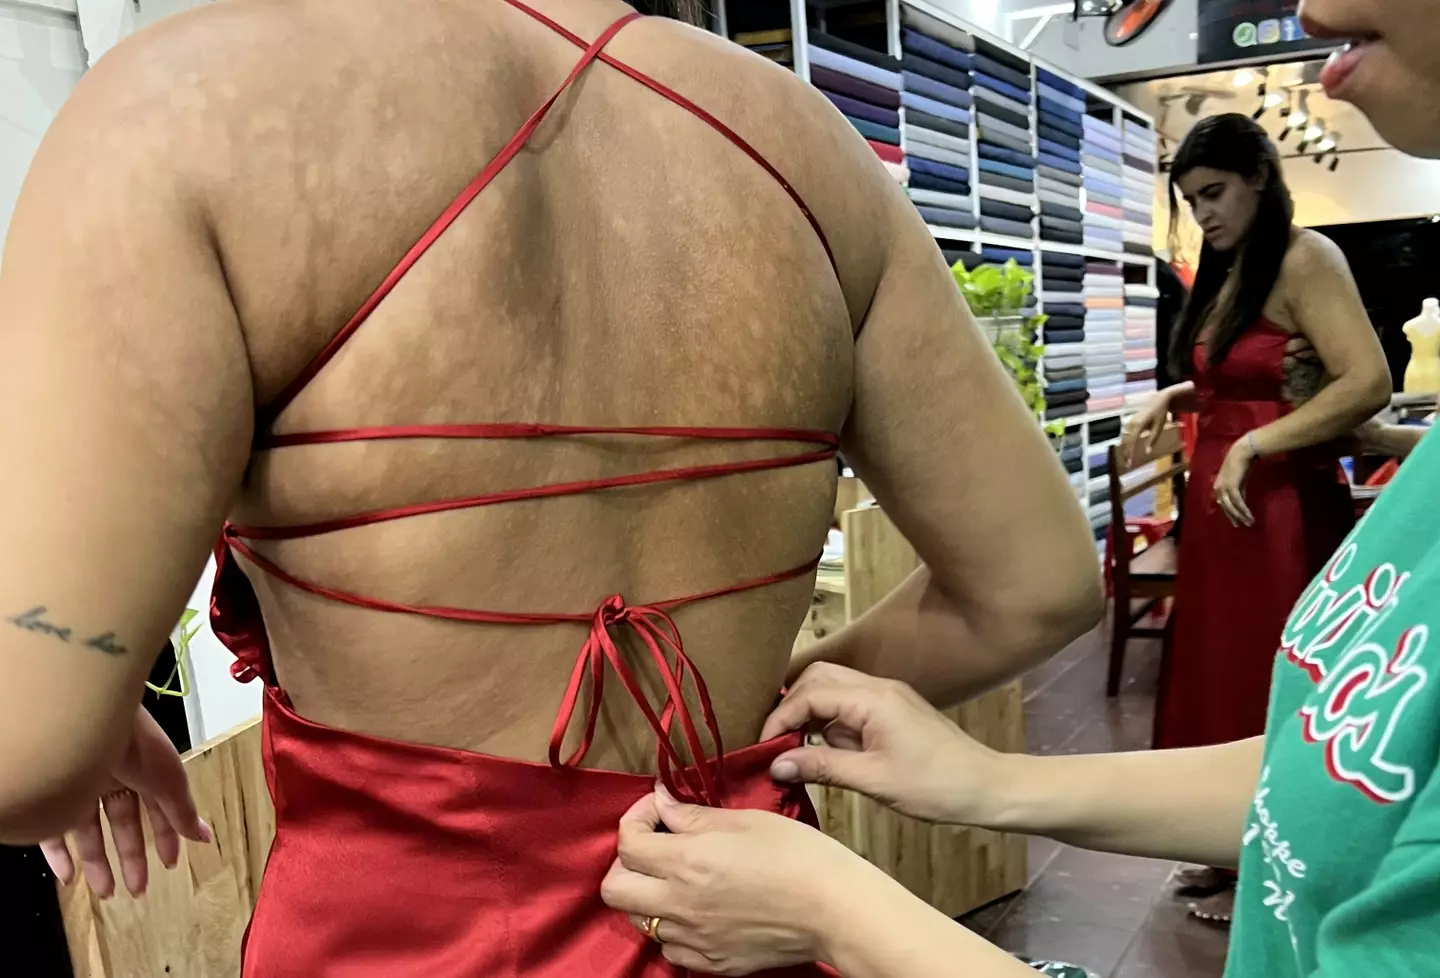 The influencer, 21, explained that the follower told her to go to a doctor after seeing a mark on her back.